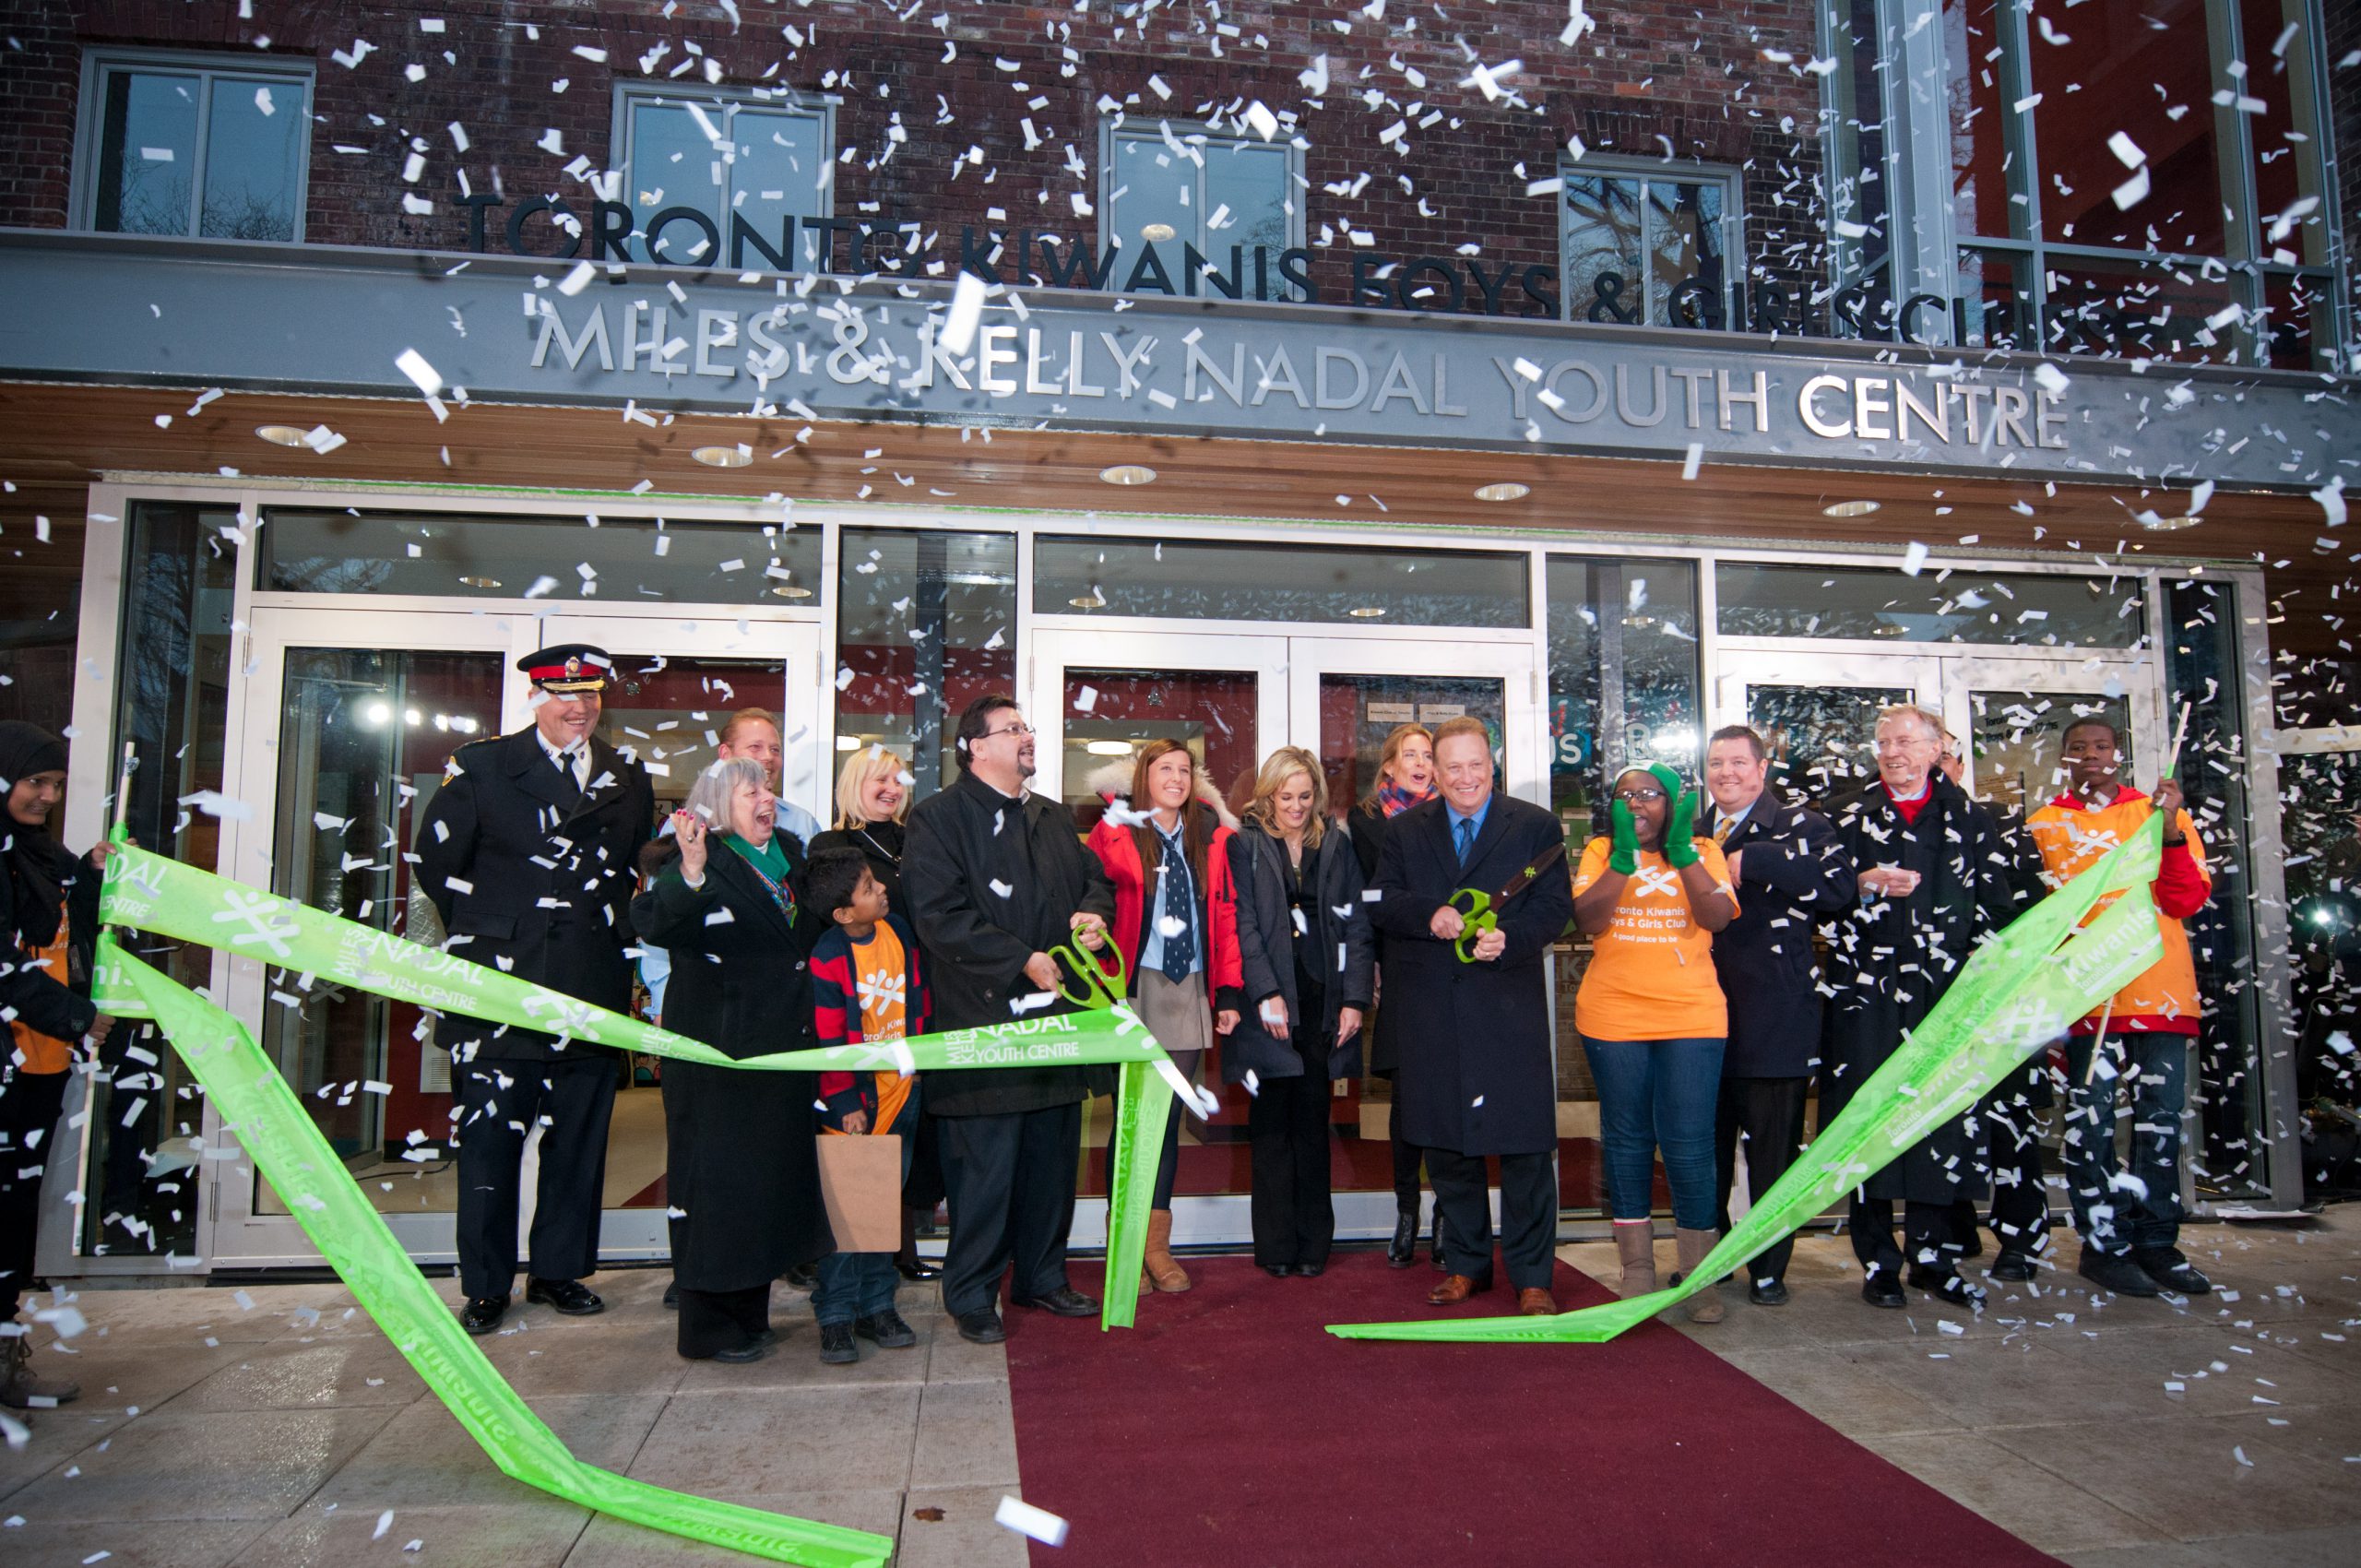 Chris Dunlop, local politicians and representatives from BGC Toronto Kiwanis applaud as a ceremonial ribbon is cut in front of the new building and confetti flies through the air